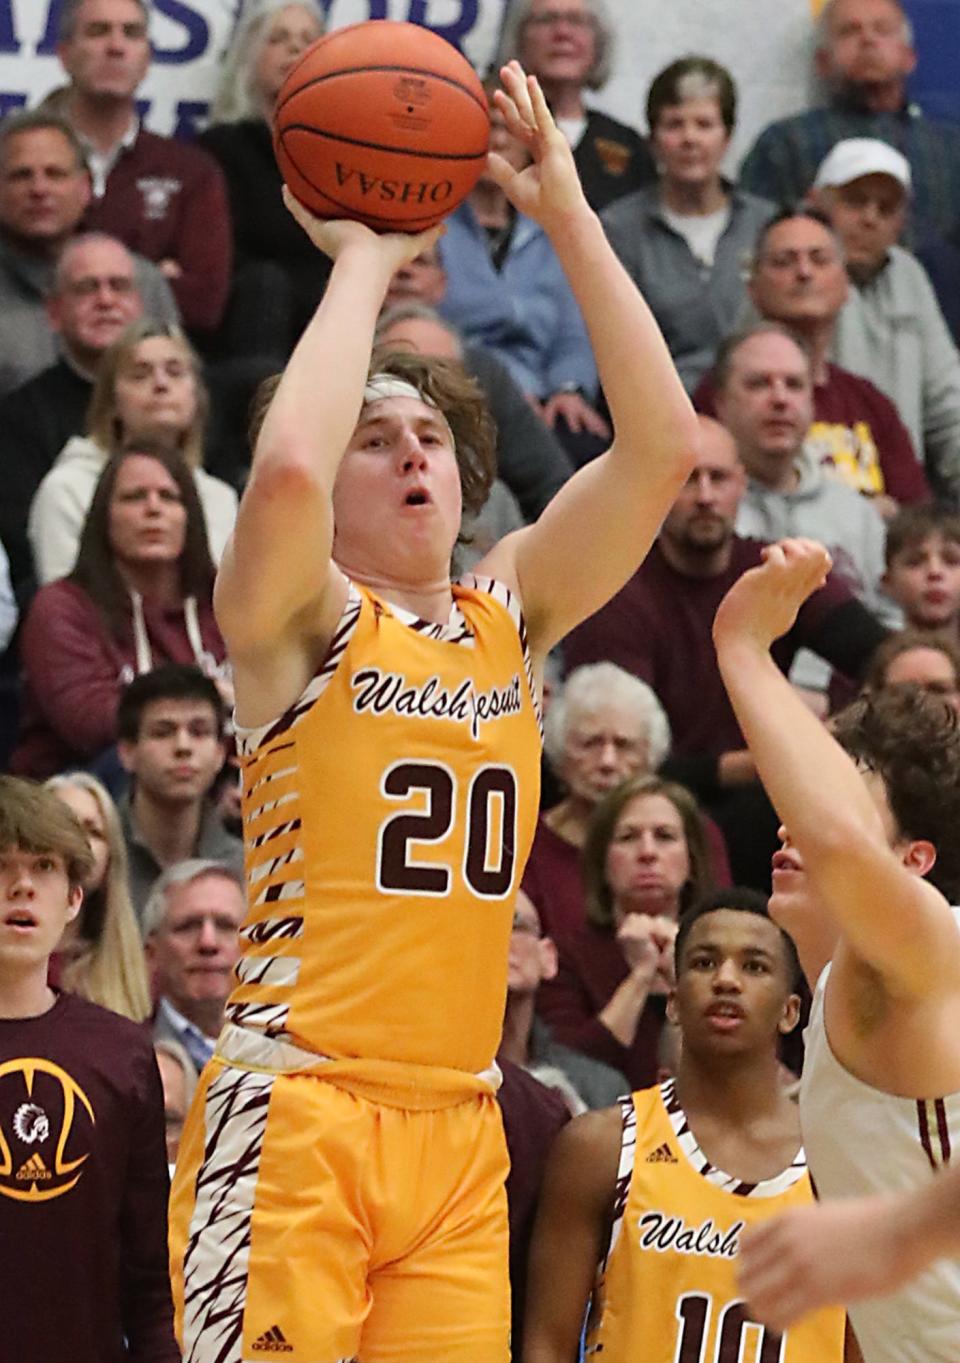 Walsh Jesuit's Zach Halligan shoots against Stow during the Div. I regional semifinal boys basketball game at The Kent State University MAC center on Wednesday in Kent. Walsh beat Stow 63-61  in overtime.